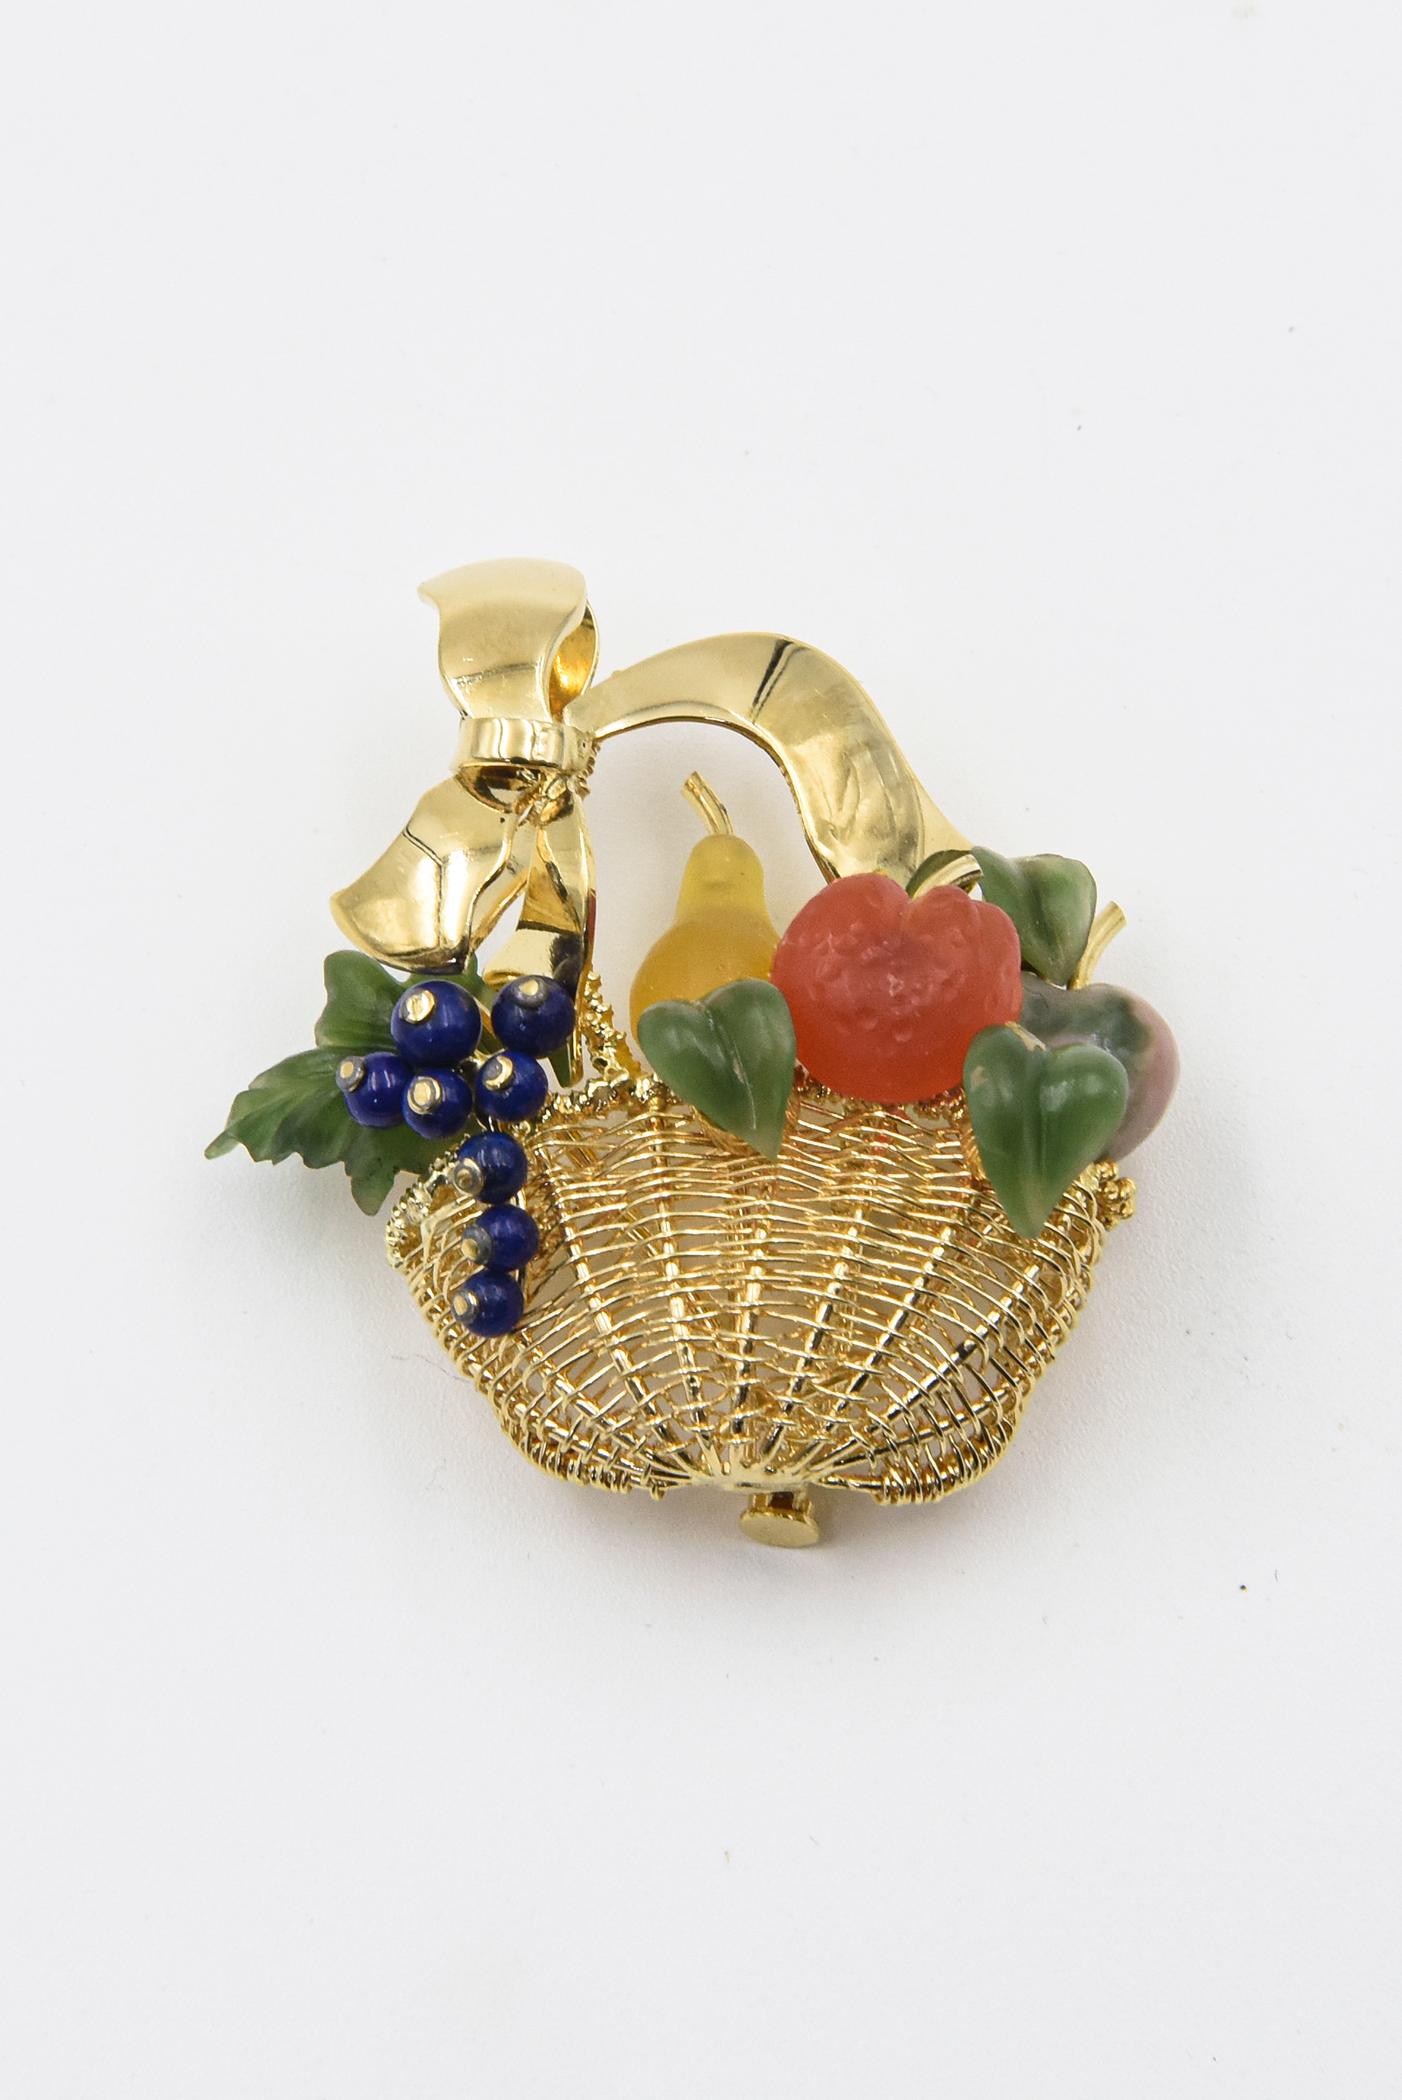 Beautiful fruit basket brooch has a carved pear, grapes, an apple and an orange with leaves as well.  The woven basket is 18k yellow with a bow handle.  The gemstones are chalcedony, quartz, lapis lazuli and jade.
